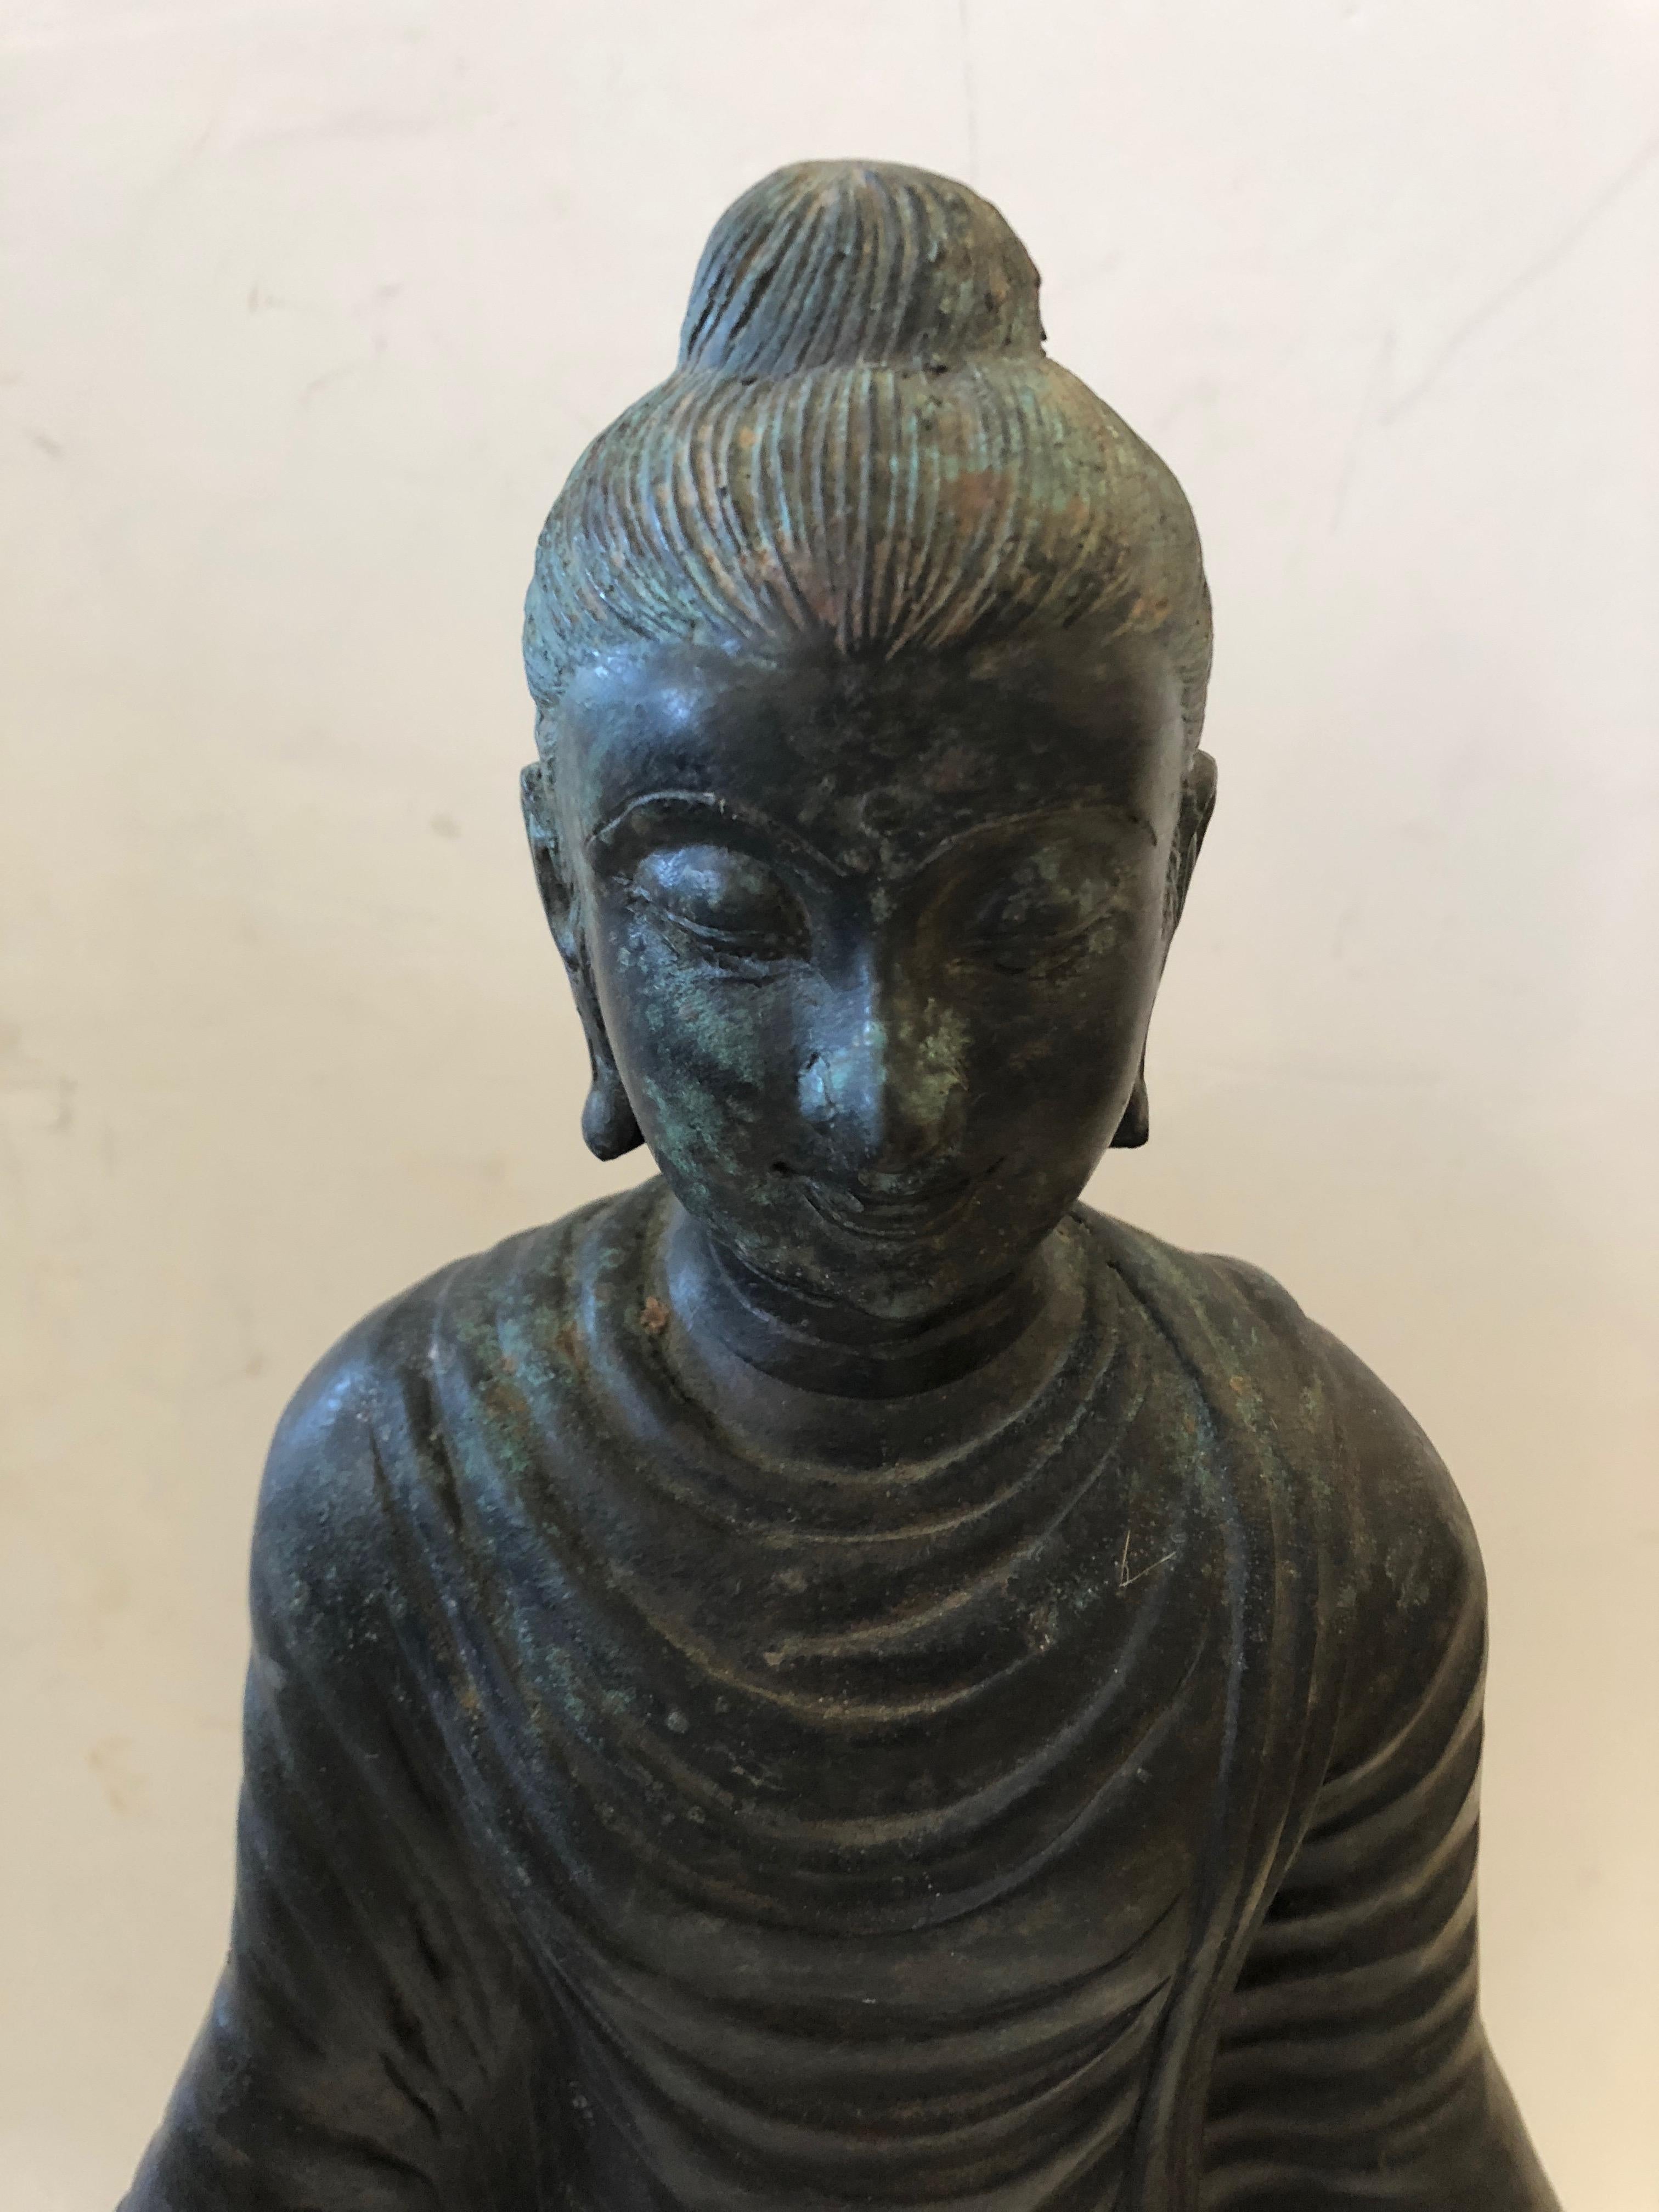 A beautiful medium sized bronze Buddha with some natural verdigris patina. The gestural hands are beautifully placed, and the meticulous detailing is impressive.